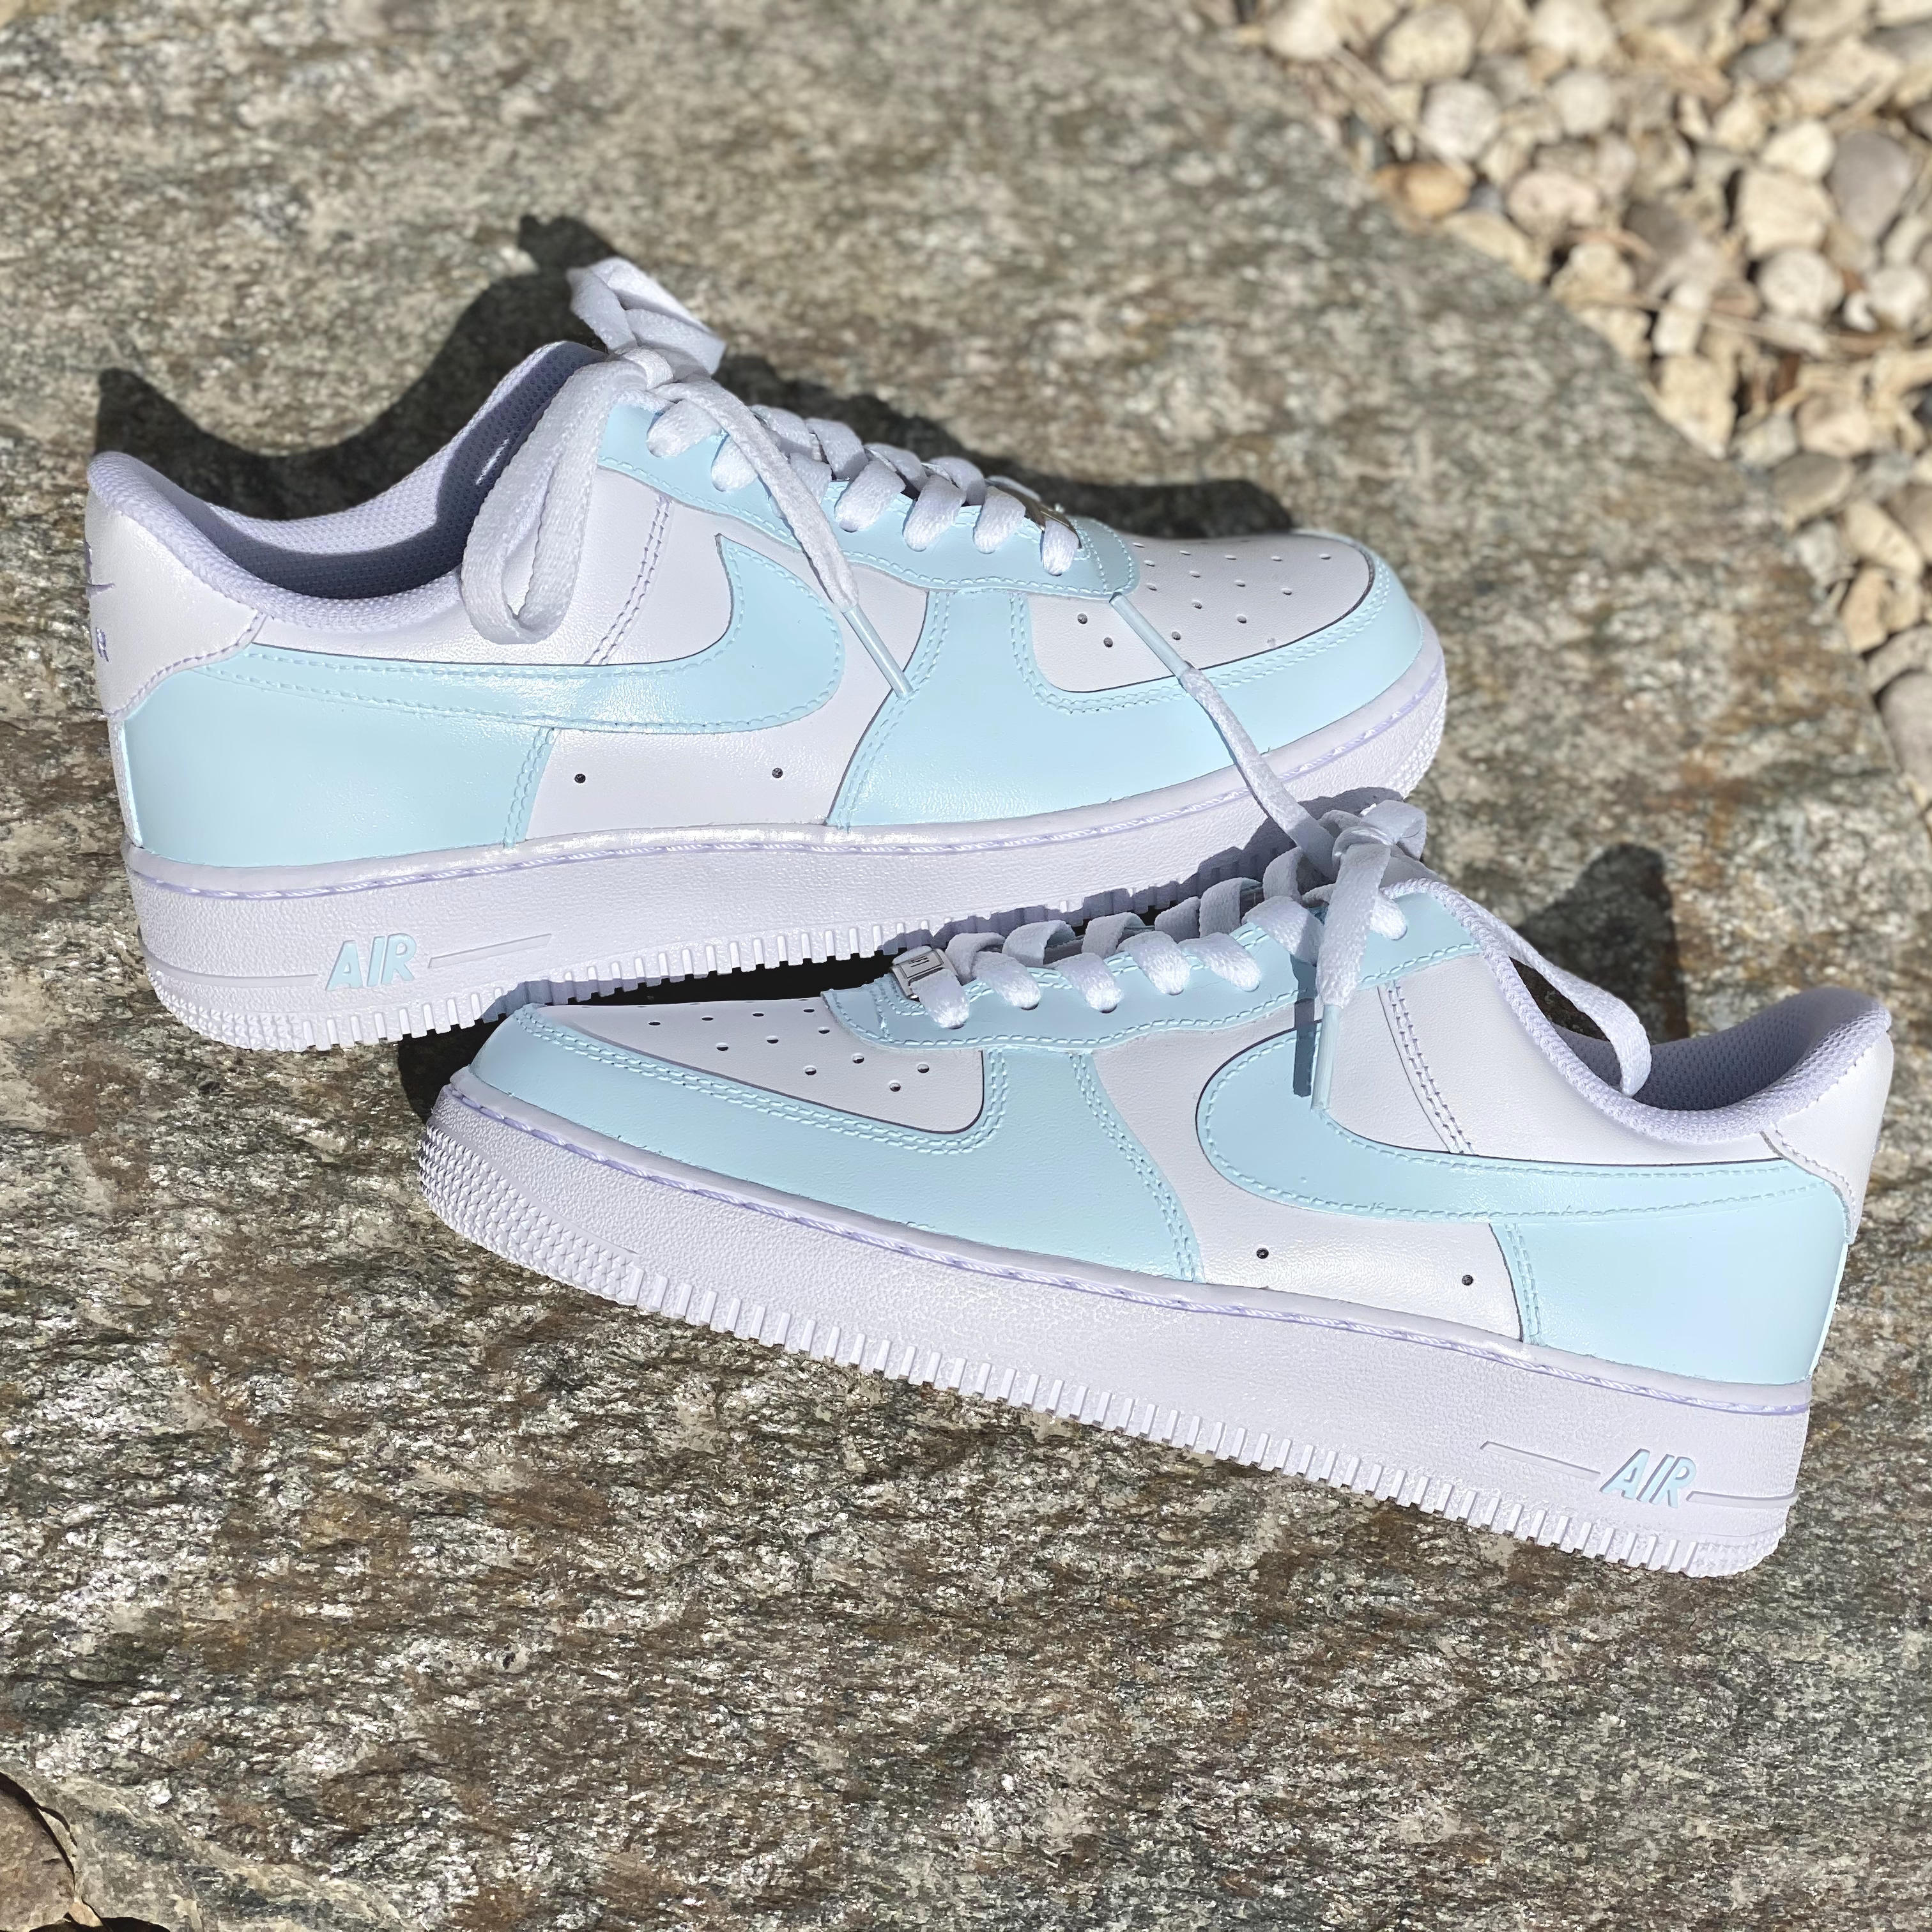 Baby Blue Air Force 1 